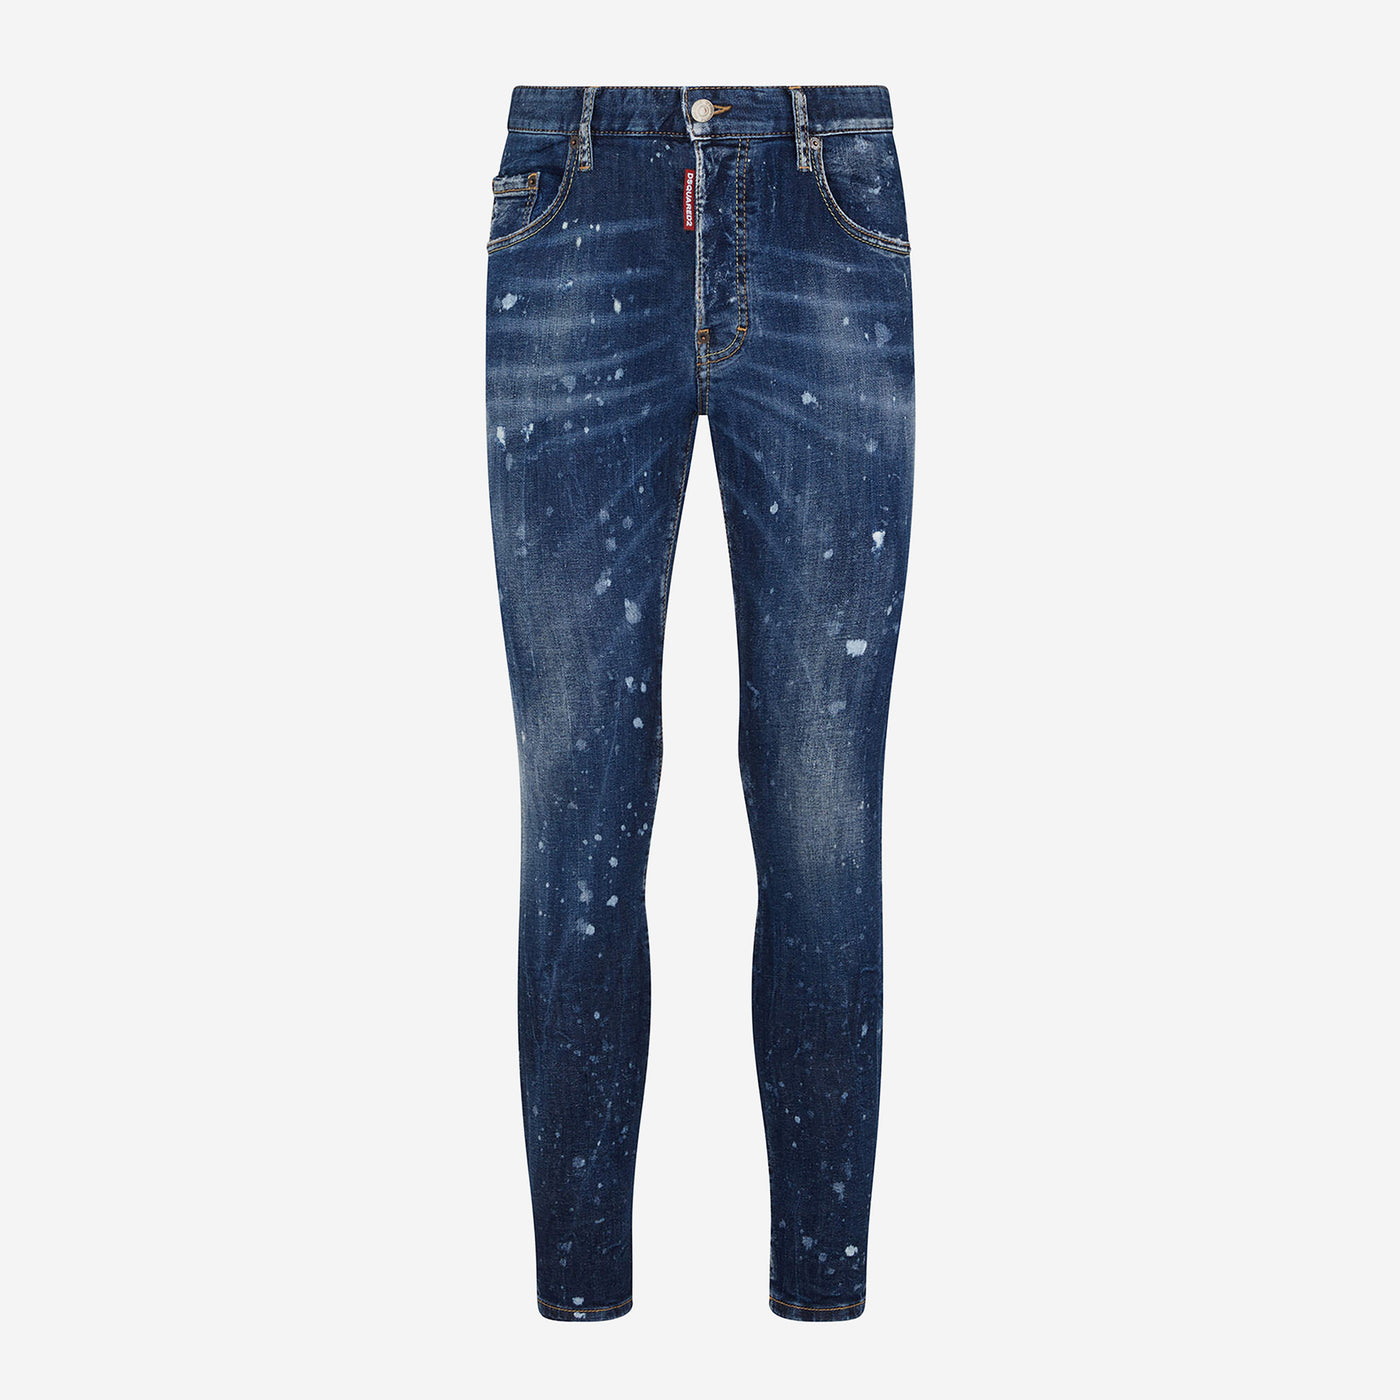 DSquared2 Dark Moldy Wash Super Twinky Jeans